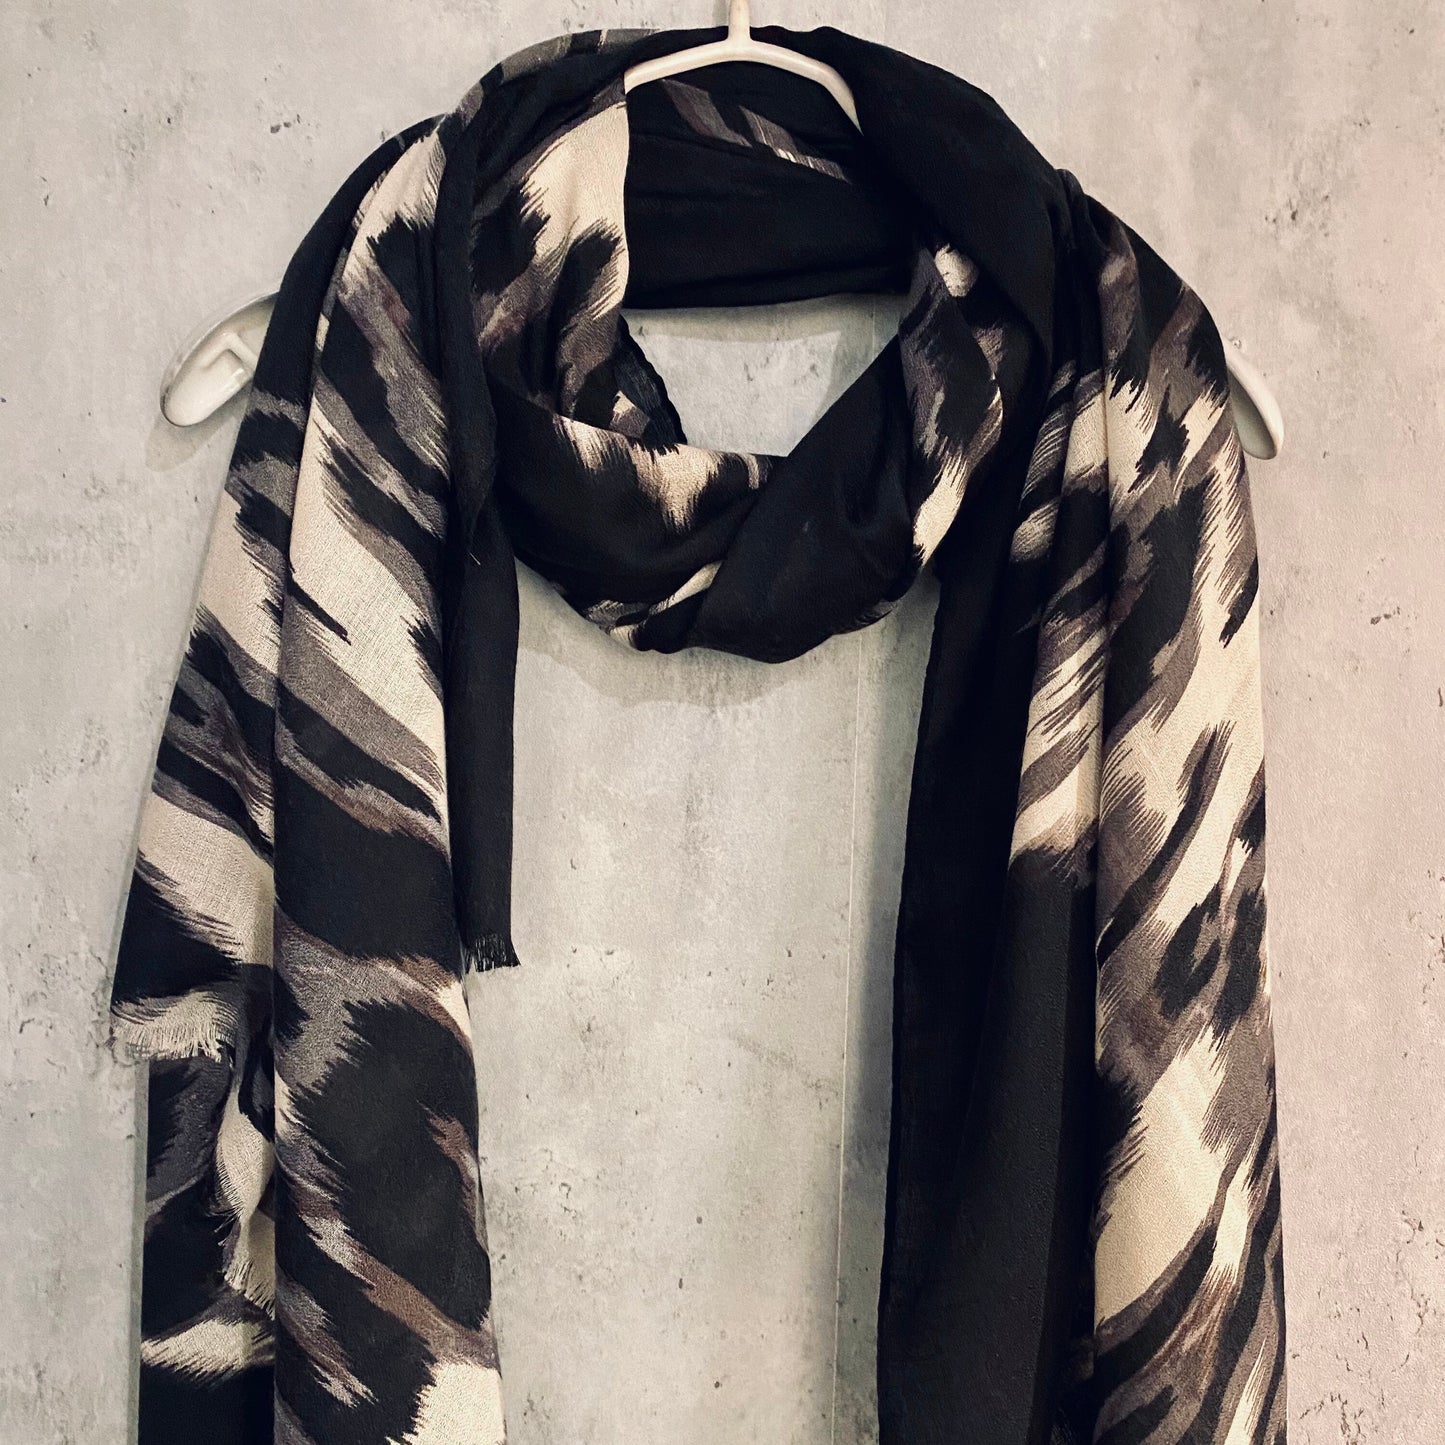 Classic Ikat Pattern Black Cotton Scarf/Summer Autumn Winter Scarf/Gifts For Mom/Scarf Women/UK Seller/Gifts For Her Birthday Christmas